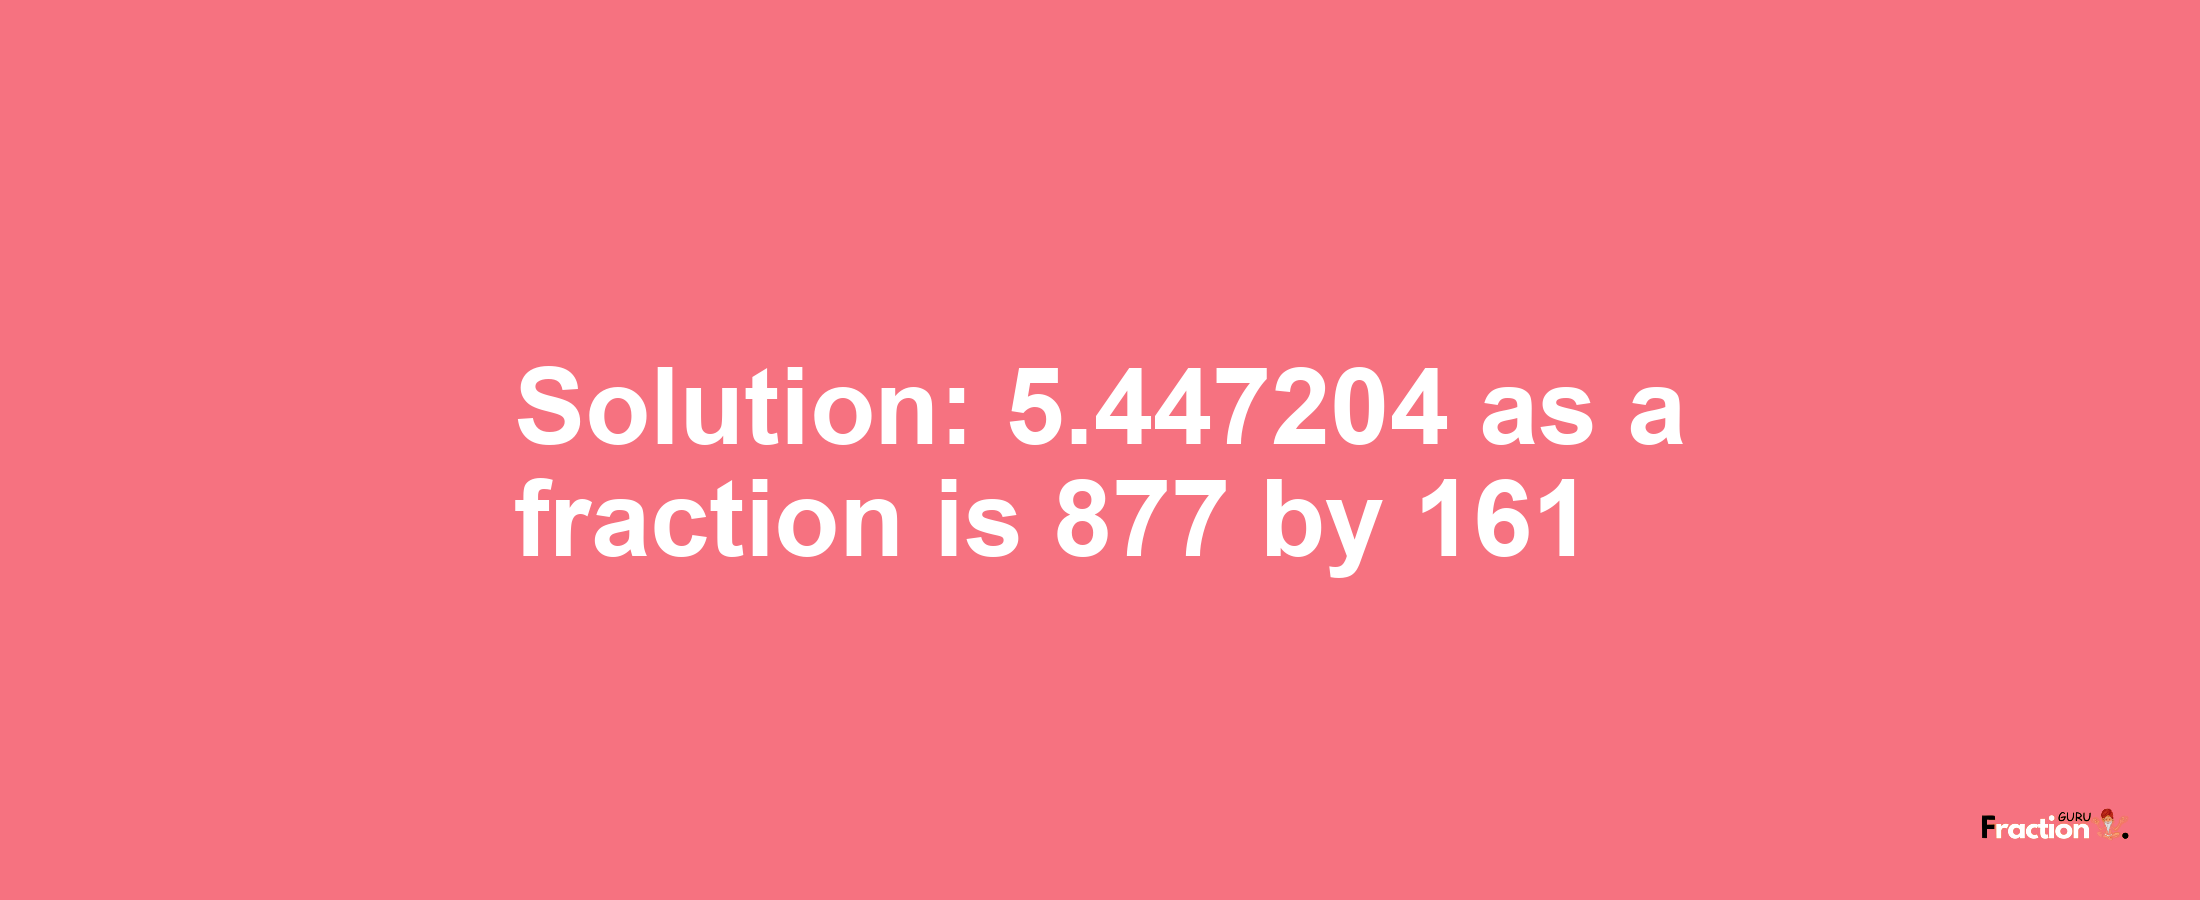 Solution:5.447204 as a fraction is 877/161